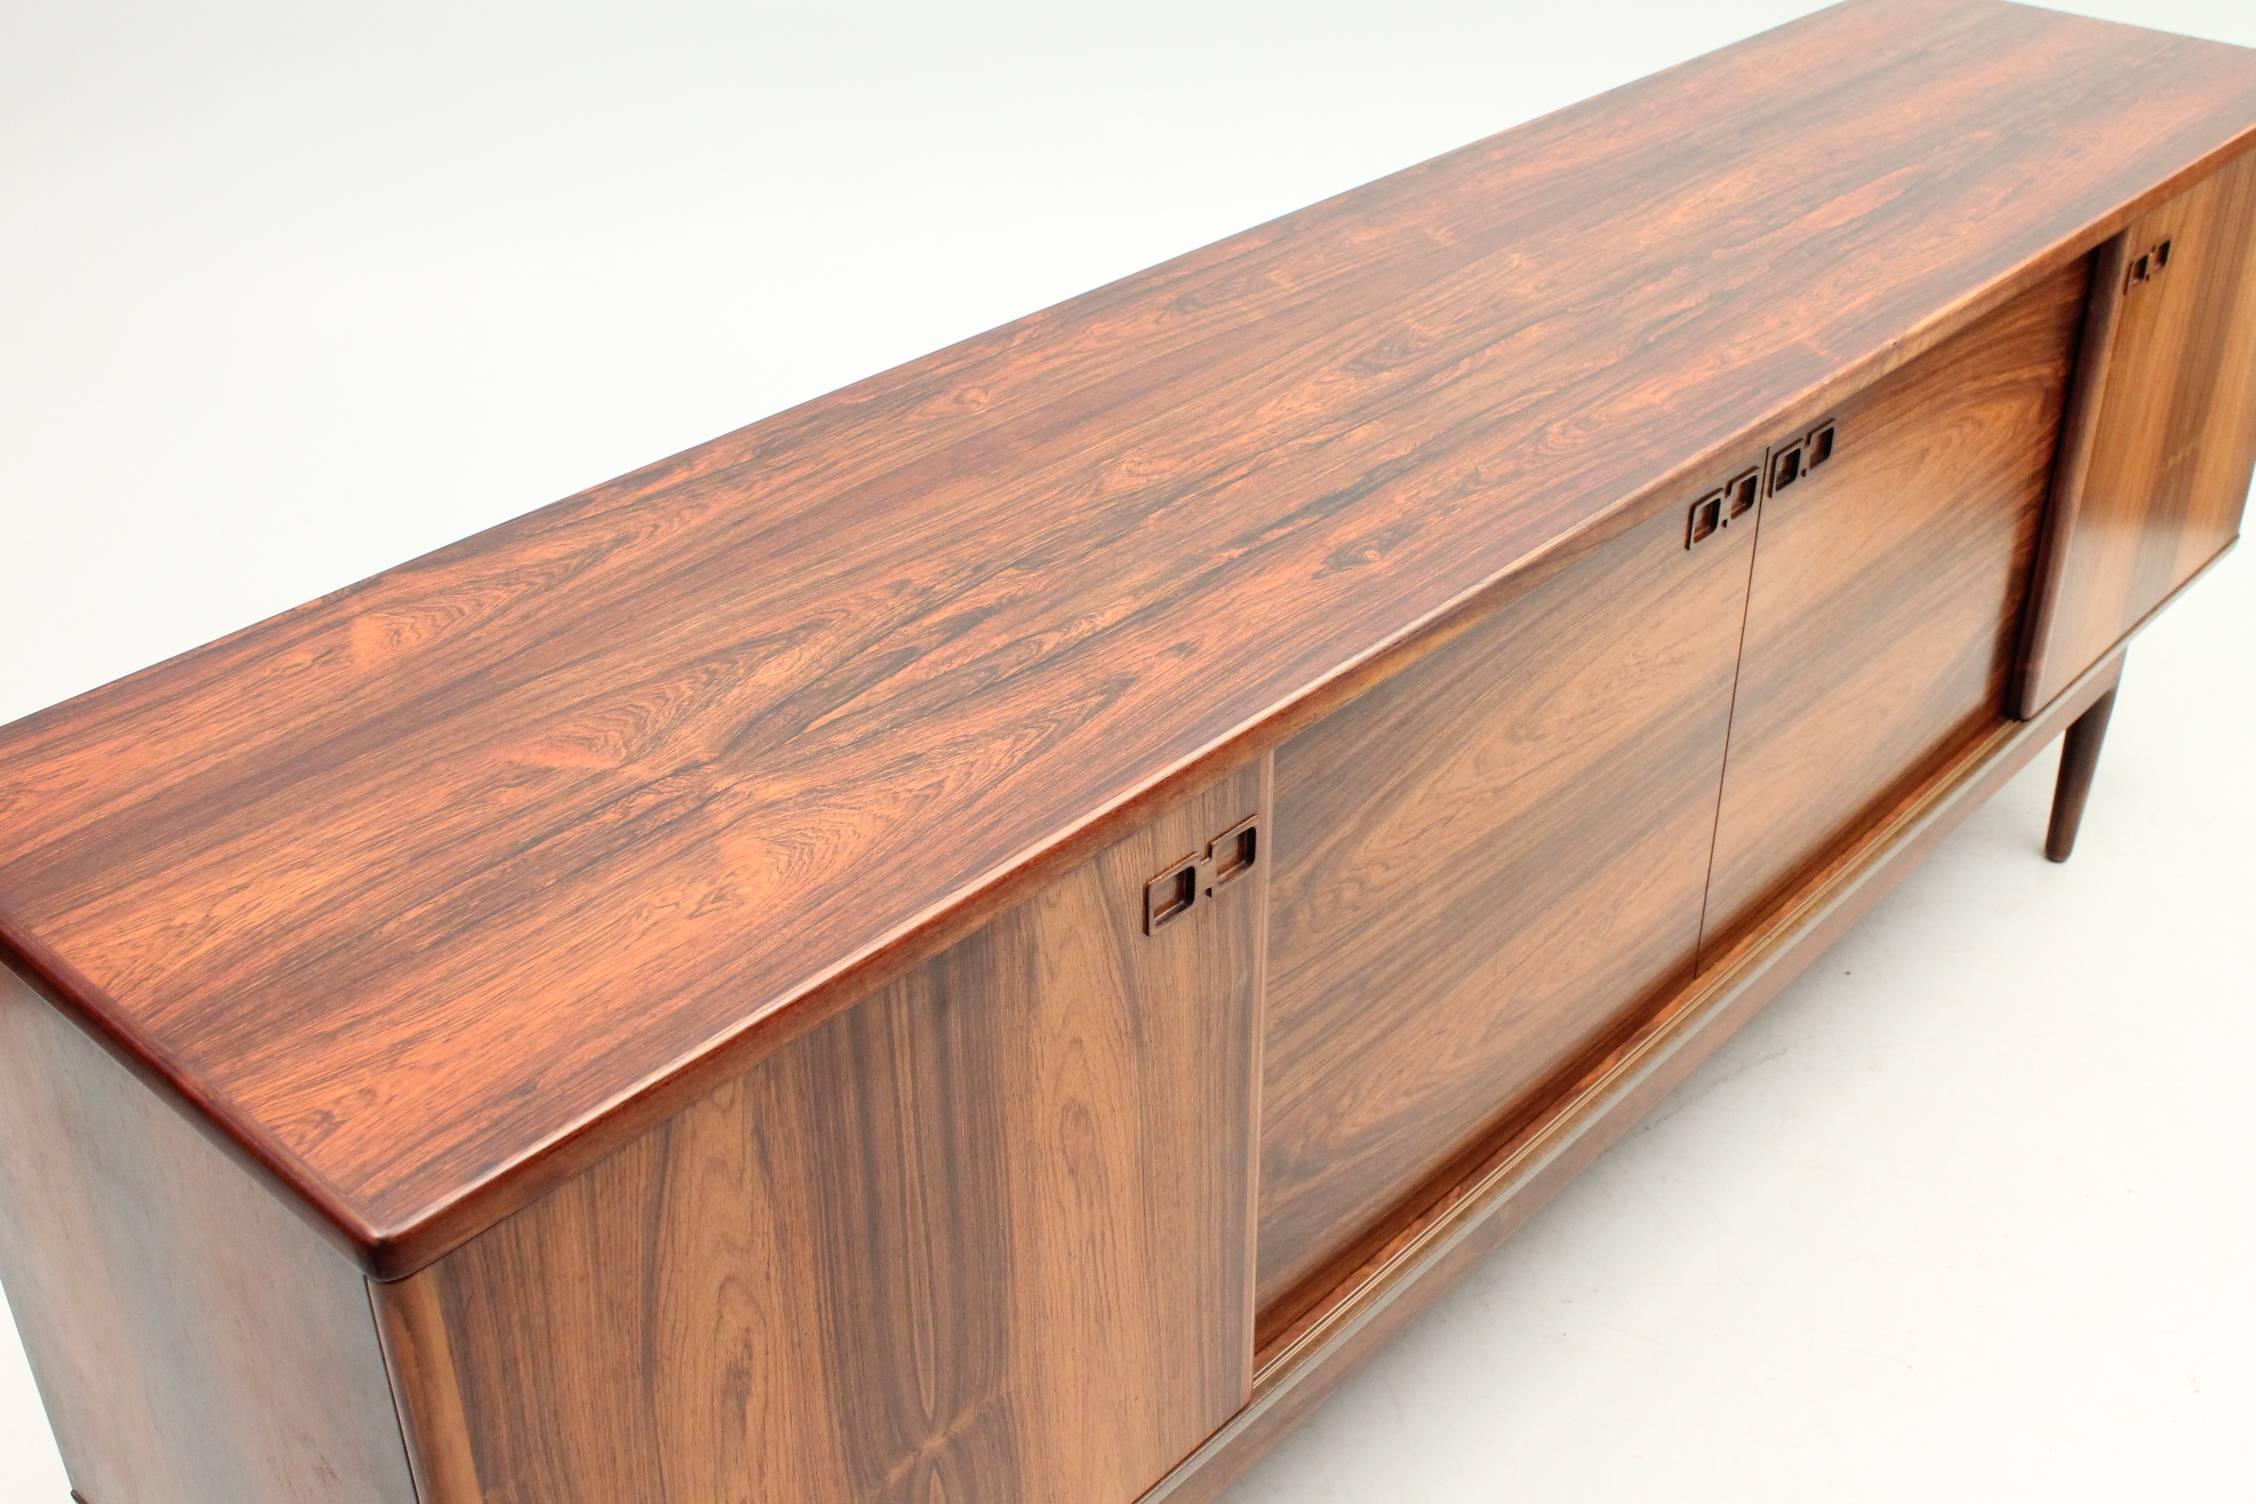 Late 20th Century Rosewood Credenza by Ib Kofod-Larsen for Faarup Møbelfabrik, Scandinavian Modern For Sale